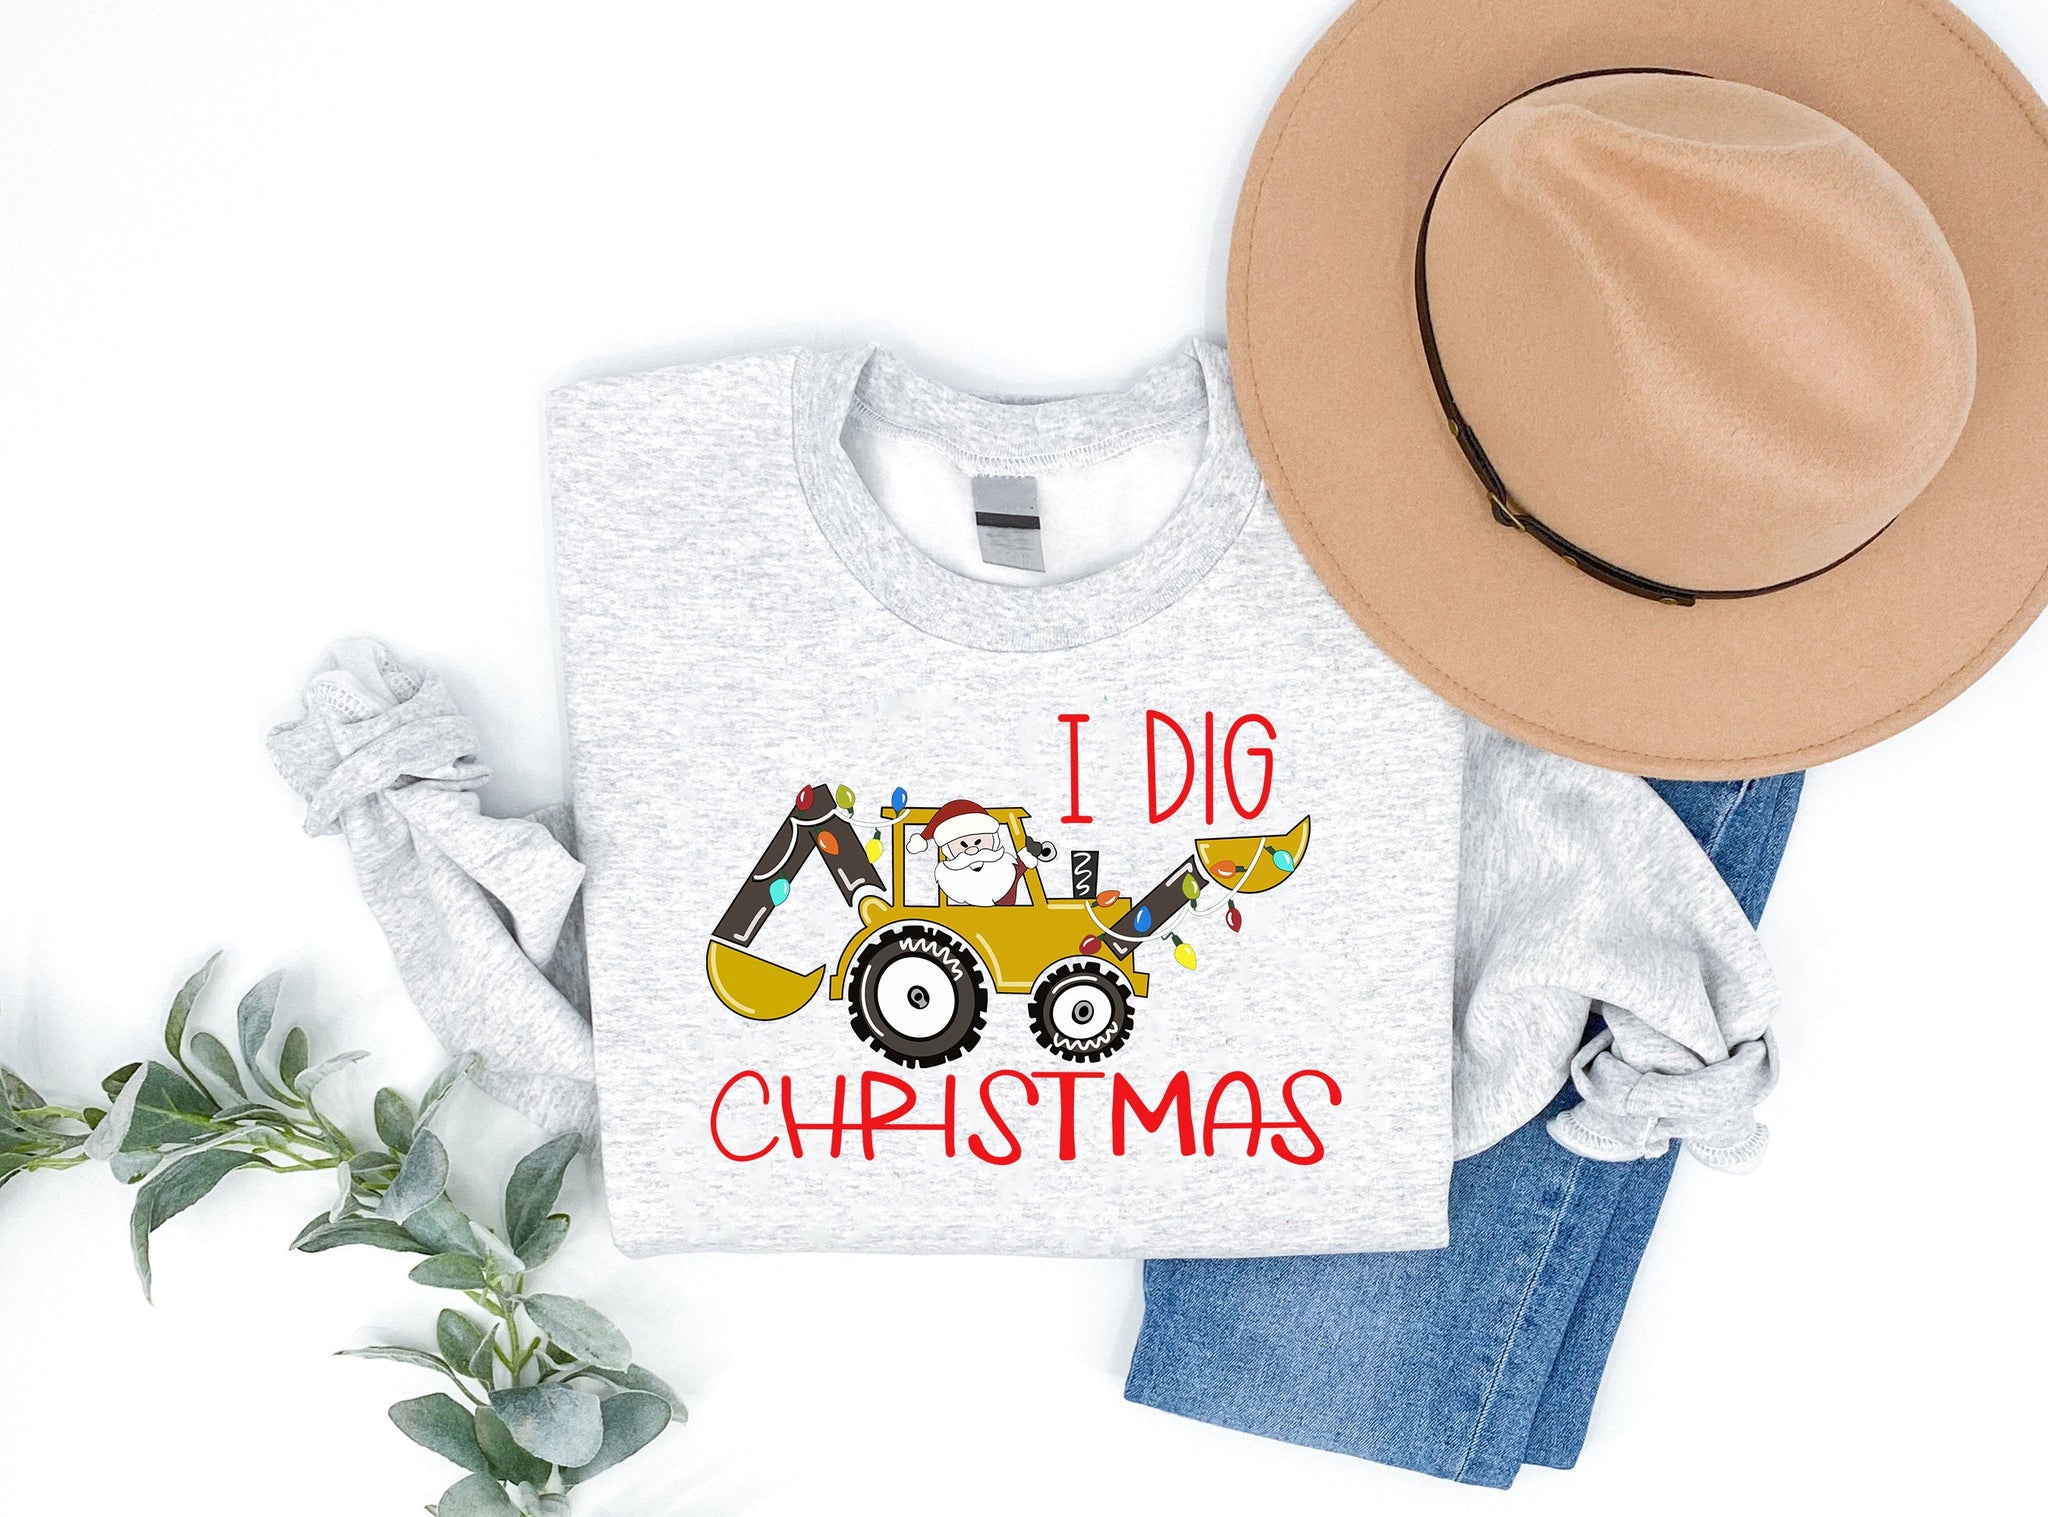 'I Dig Chirstmas'Letters And 'Excavator' Pattern Family Christmas Matching Pajamas Tops Cute Gray Long Sleeve Sweatshirts With Dog Bandana